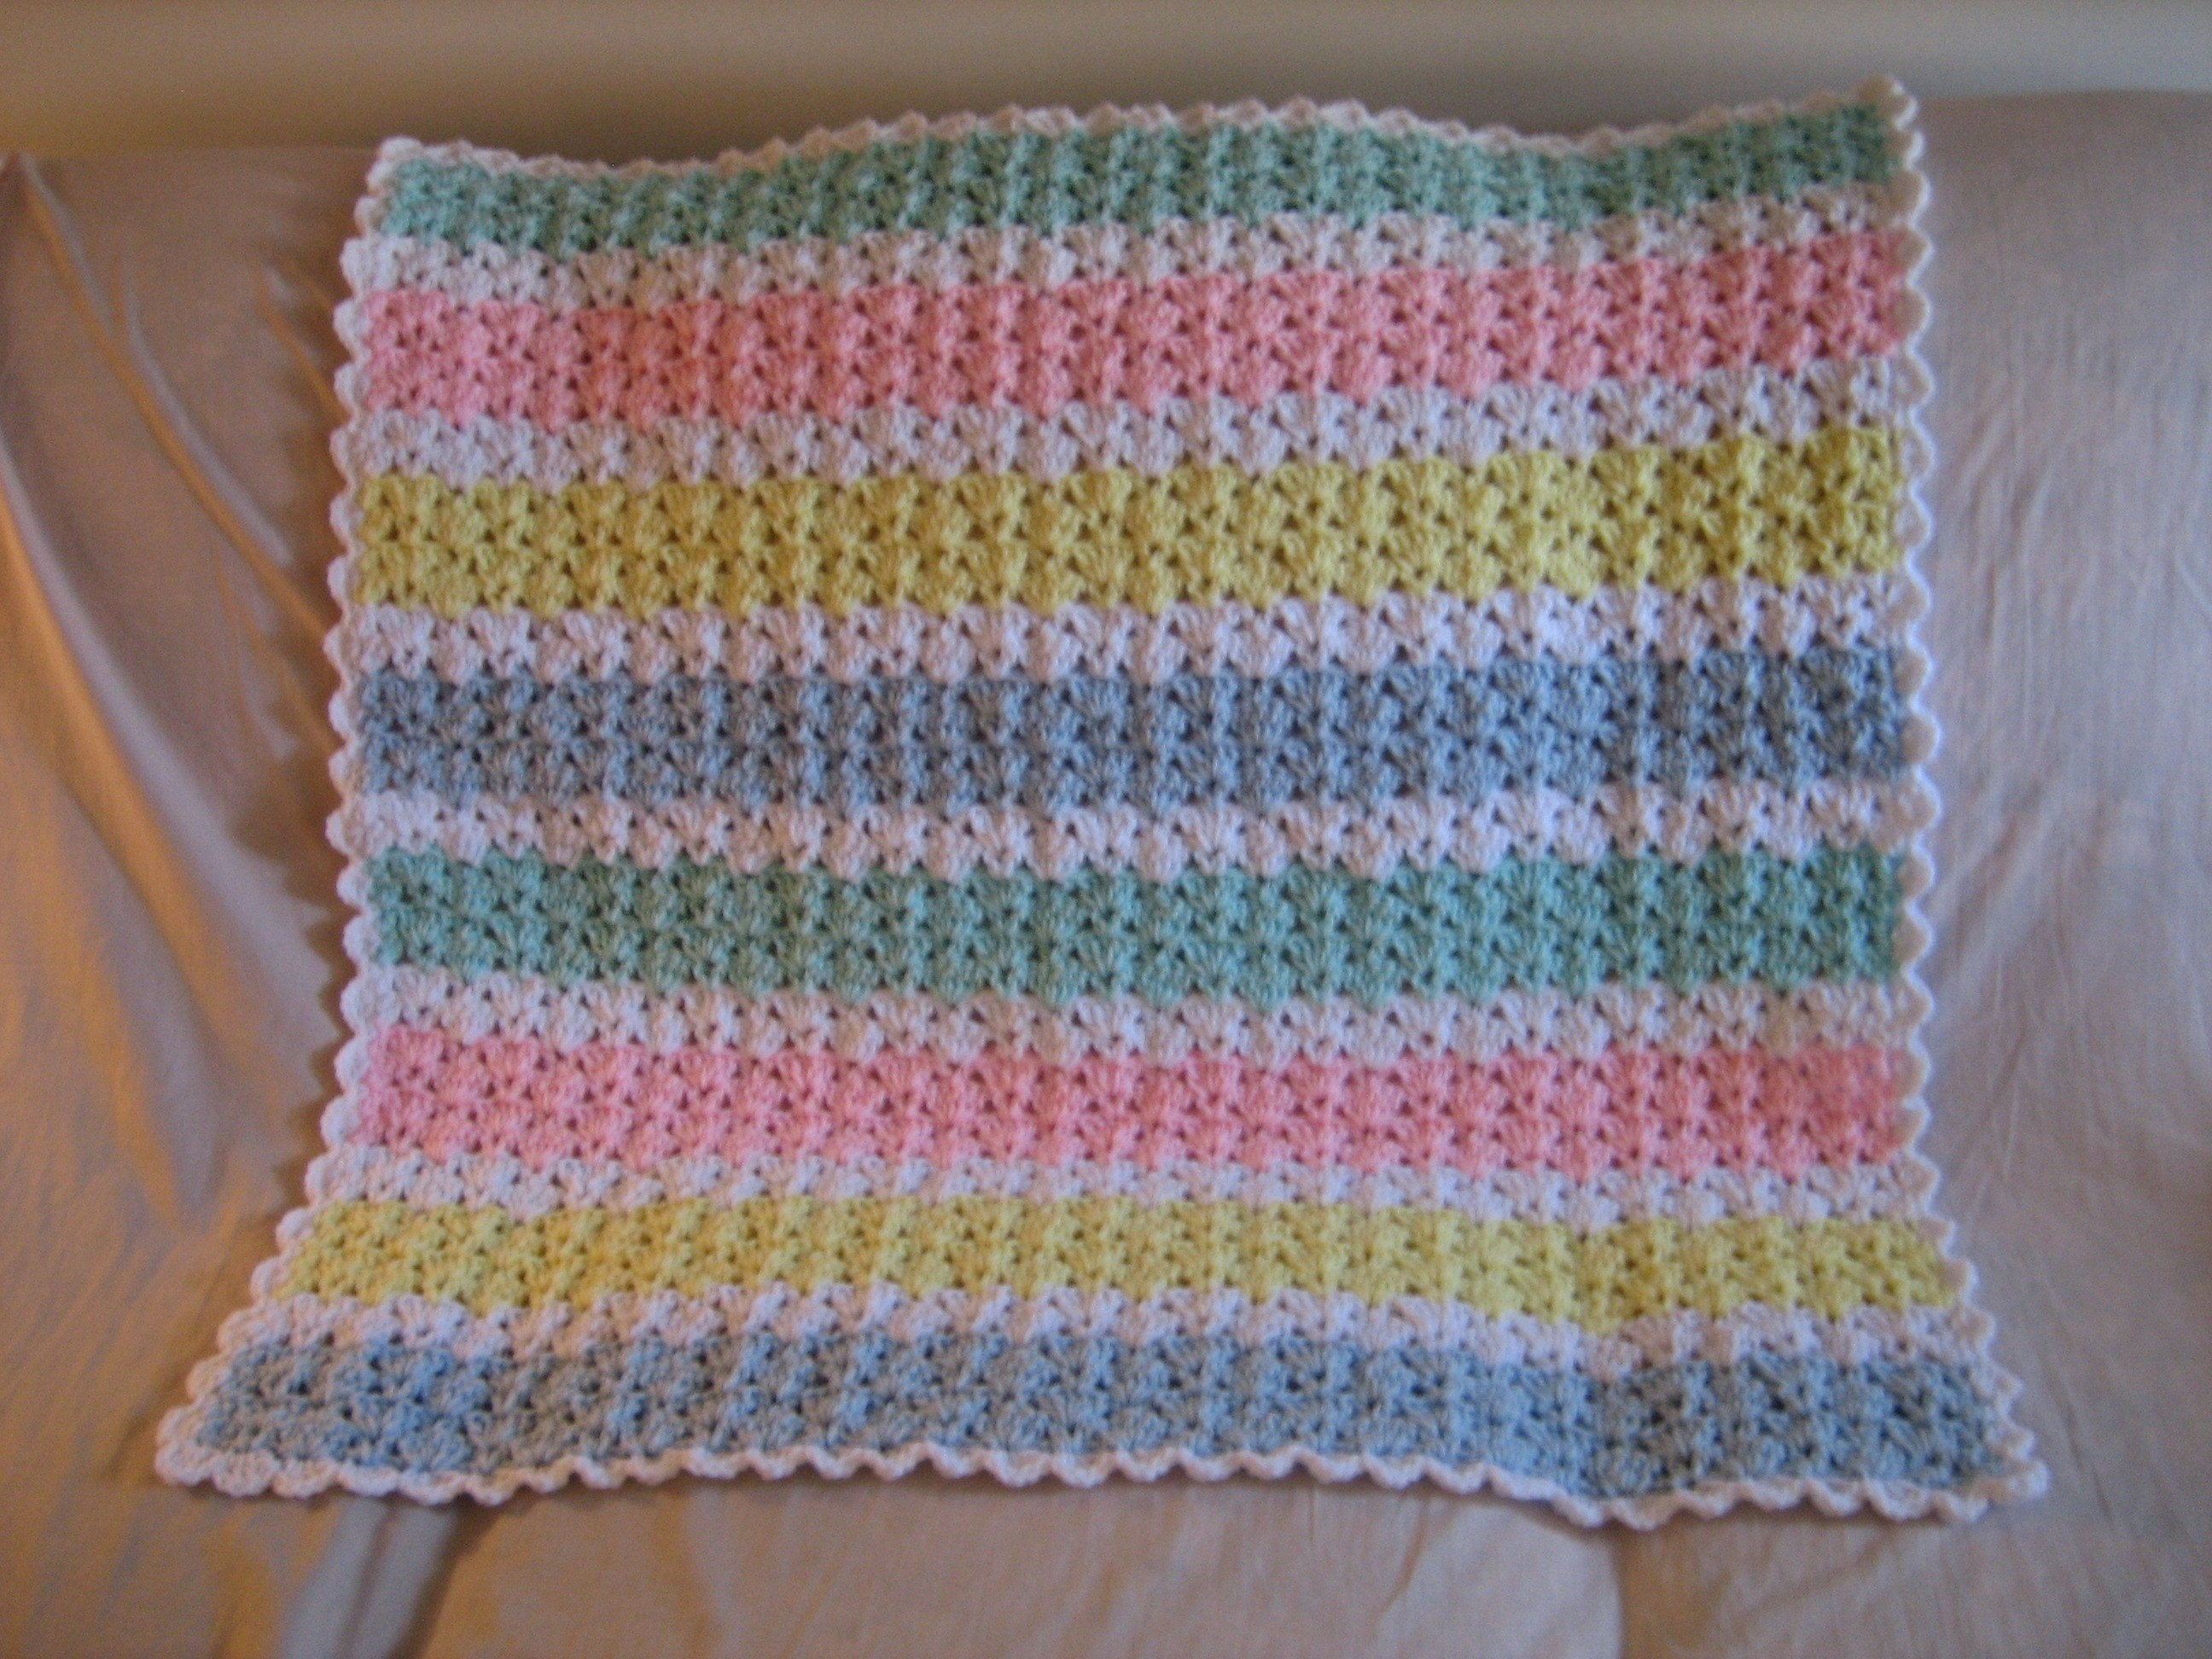 Knitted Baby Afghan Patterns Beginner Topic For Easy Beginner Knitted Ba Blanket Free Easy Knitting